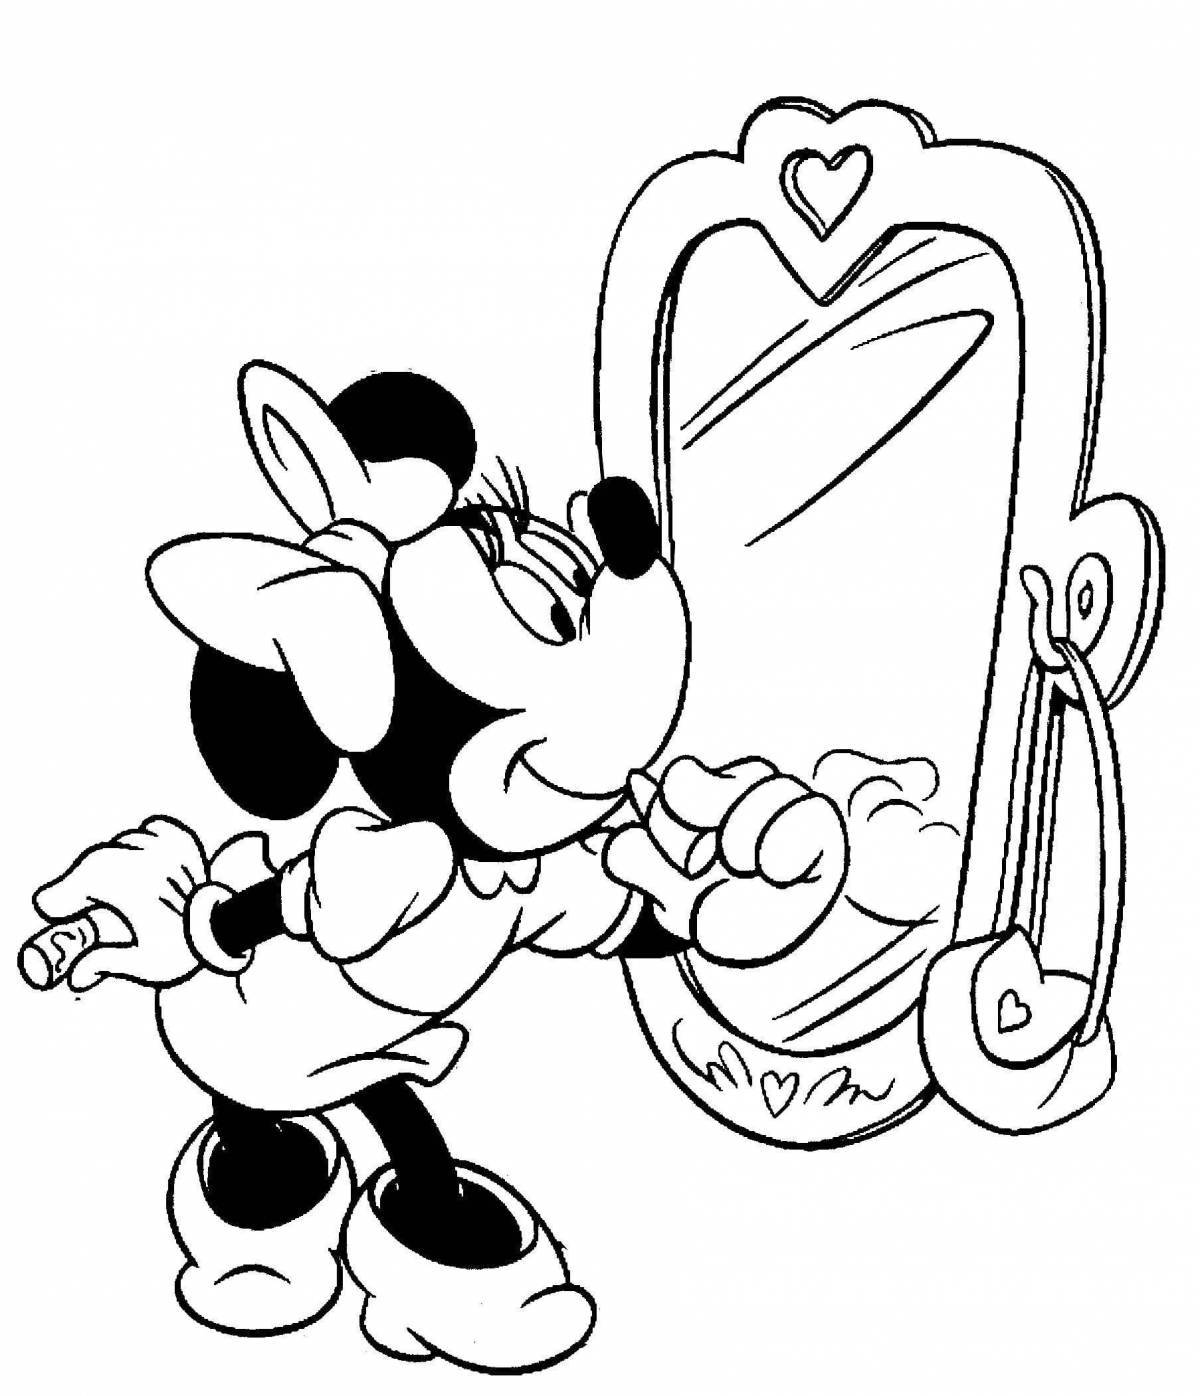 Mickey Mouse coloring book for girls